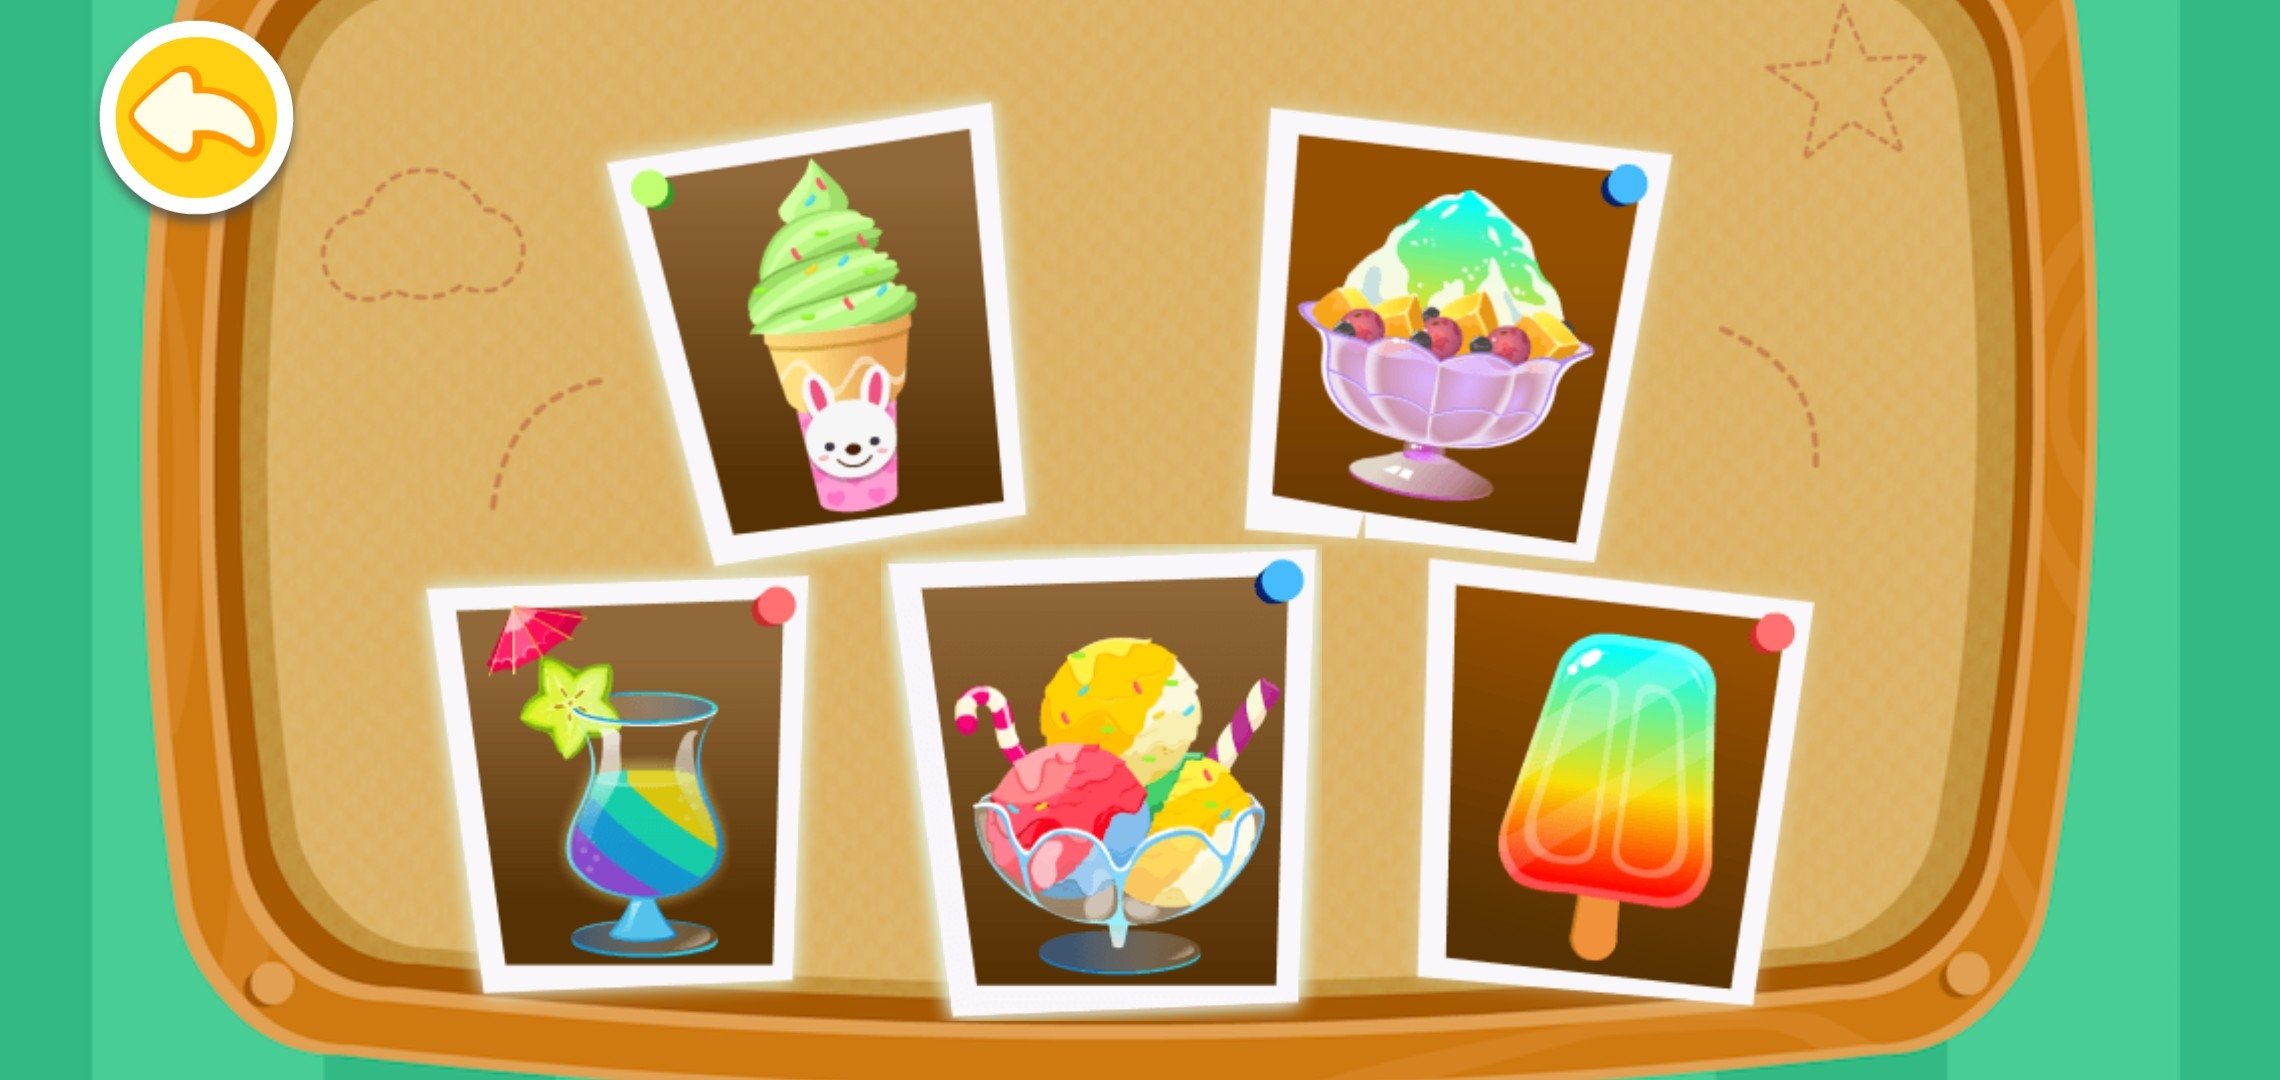 Baby Panda's Ice Cream Shop - APK Download for Android